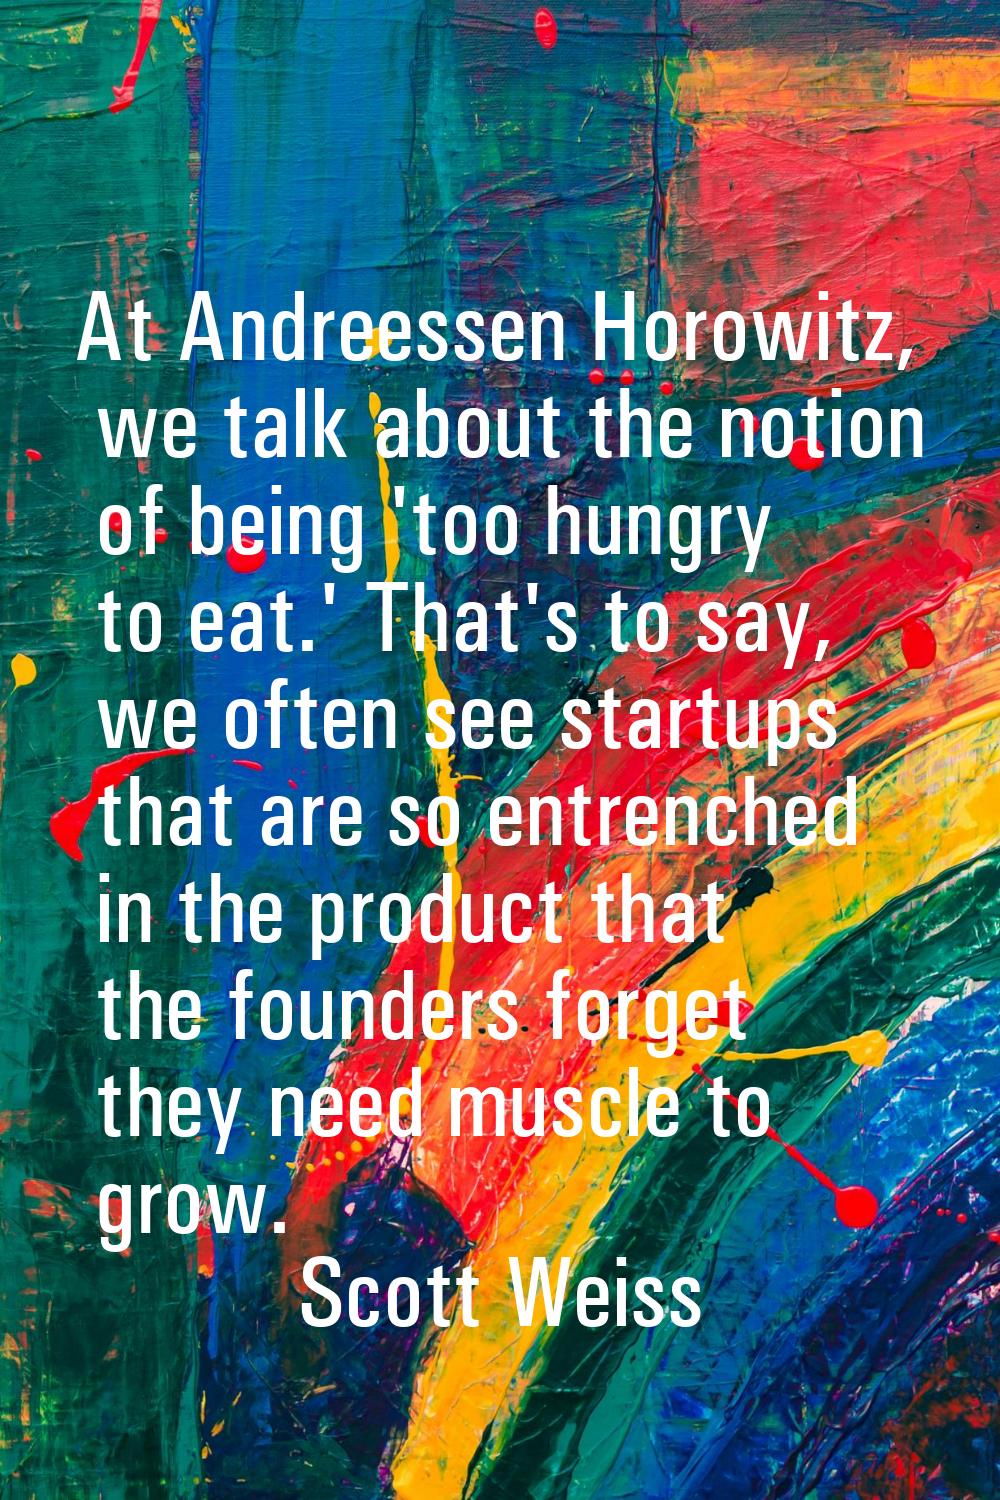 At Andreessen Horowitz, we talk about the notion of being 'too hungry to eat.' That's to say, we of